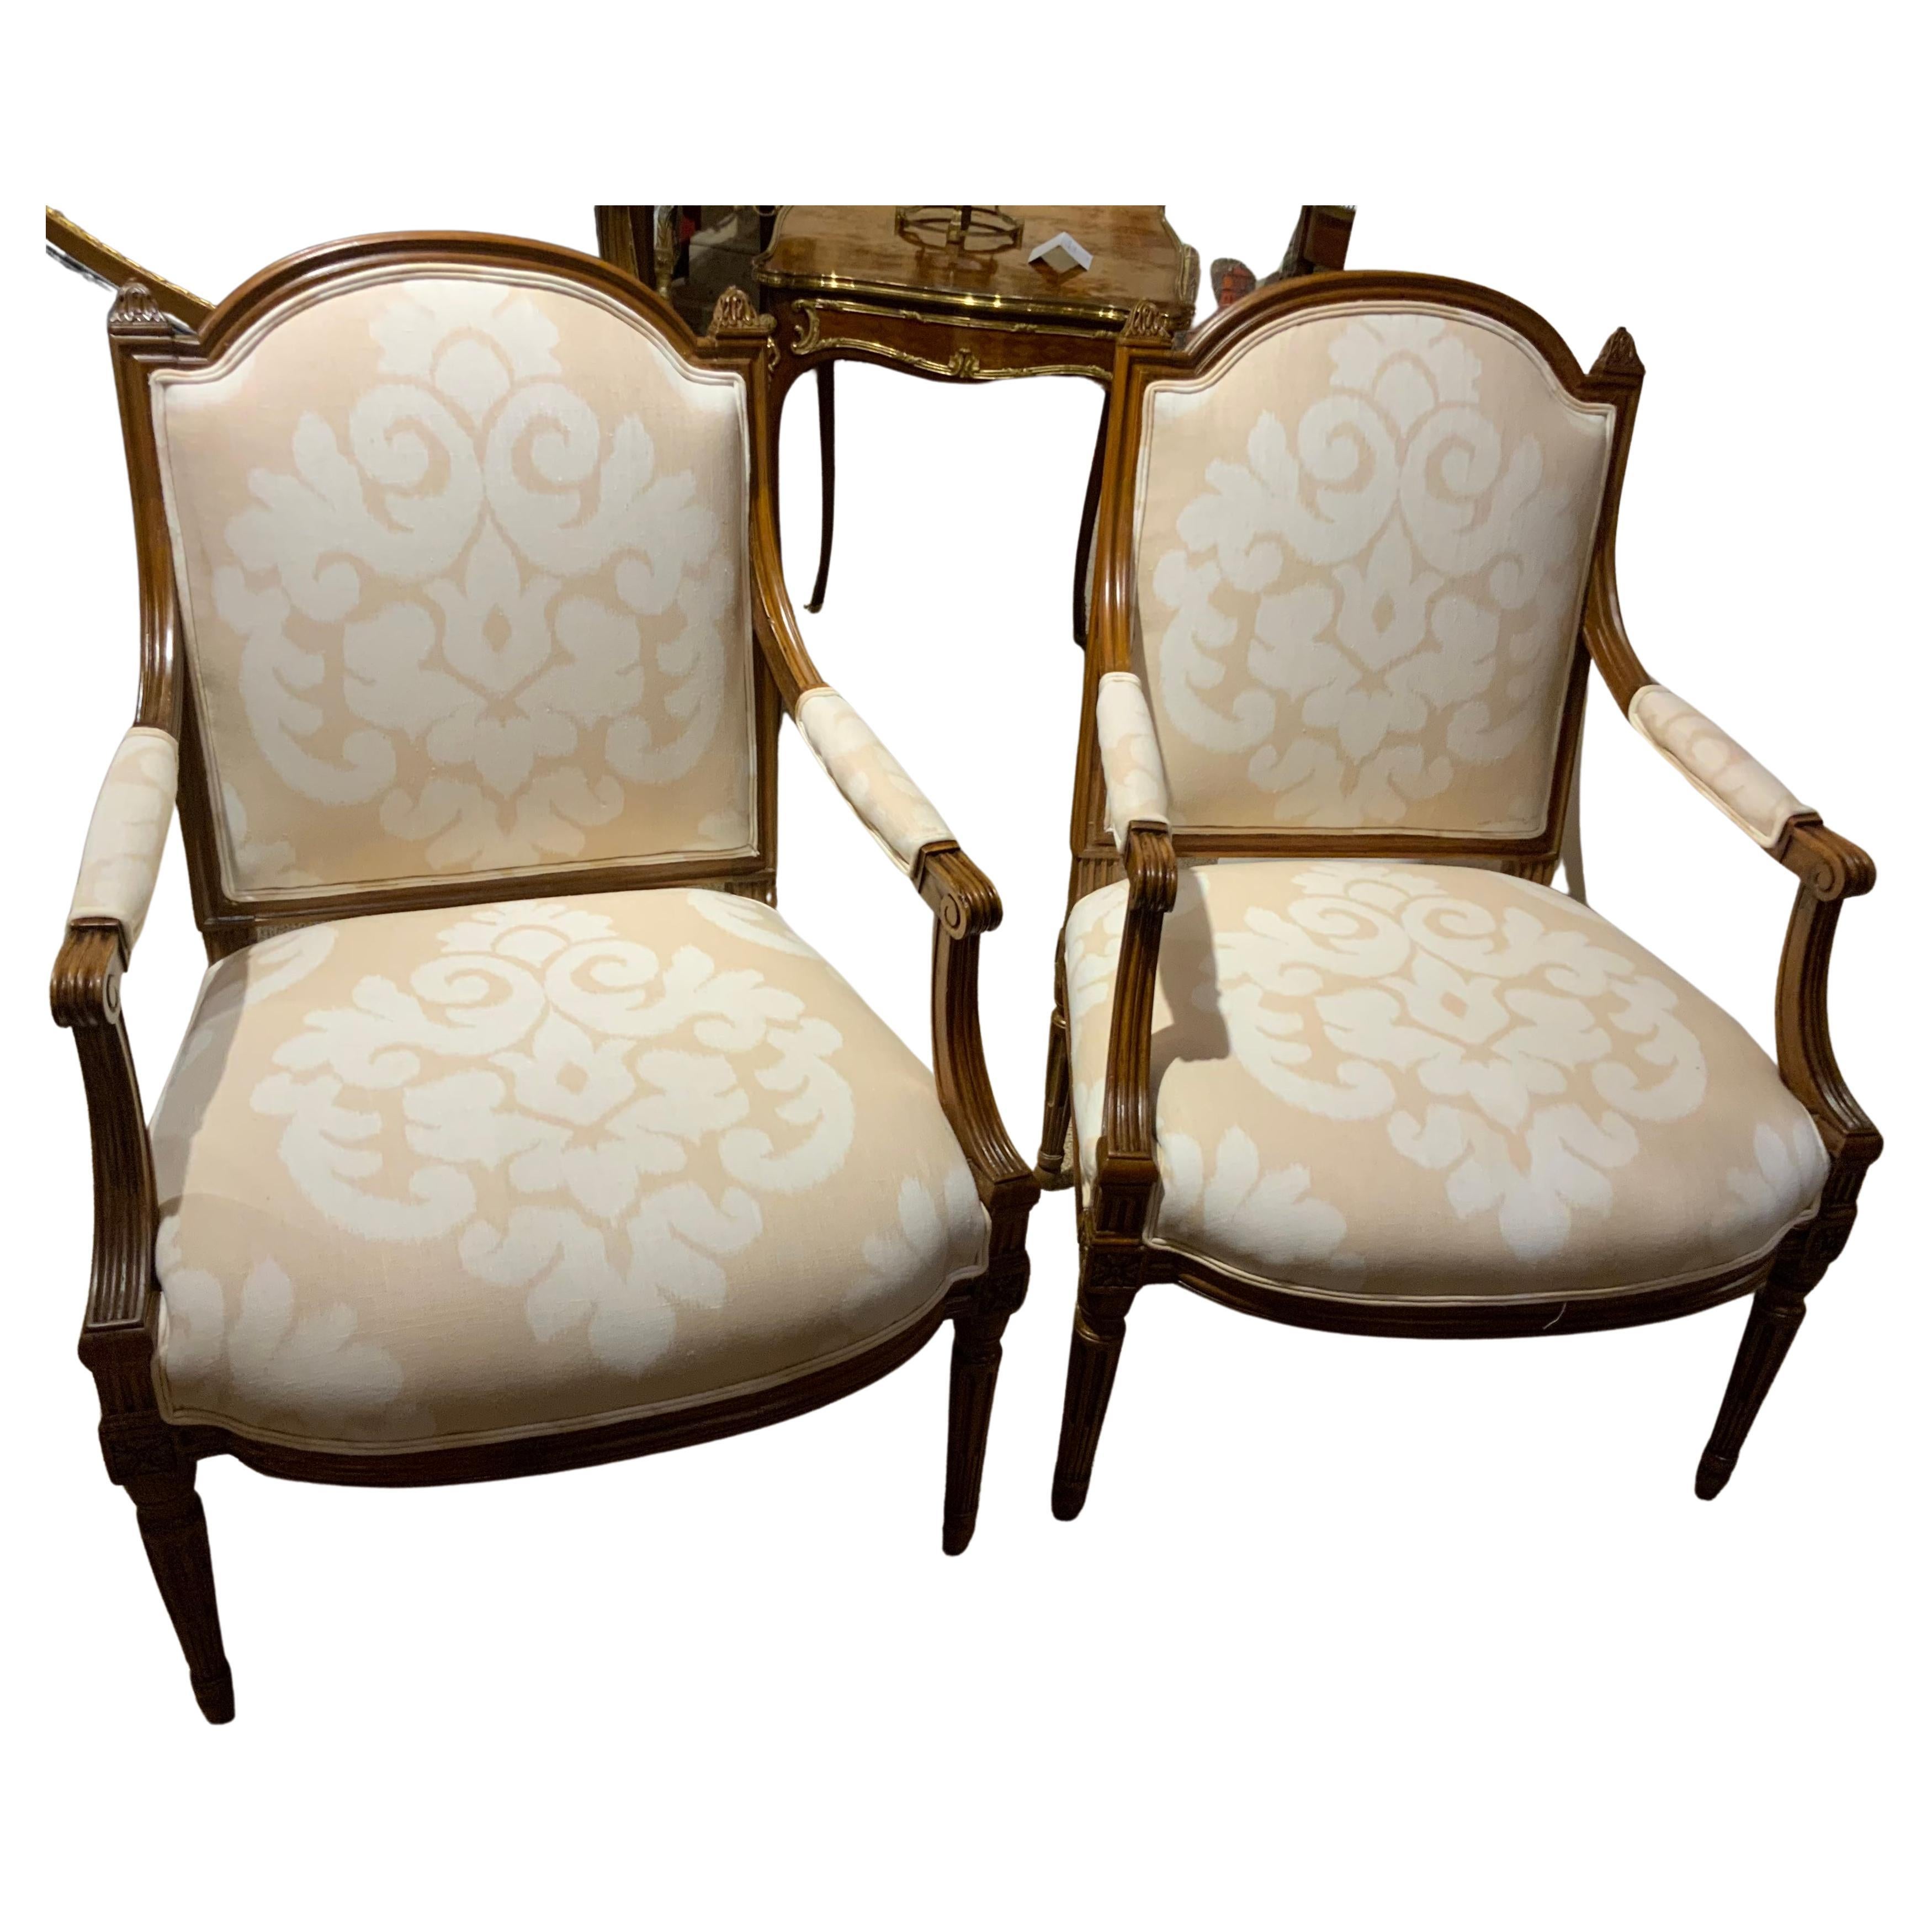 Pair of Walnut Louis XVI—Style Arm Chairs 19th Century with Domed Back For Sale